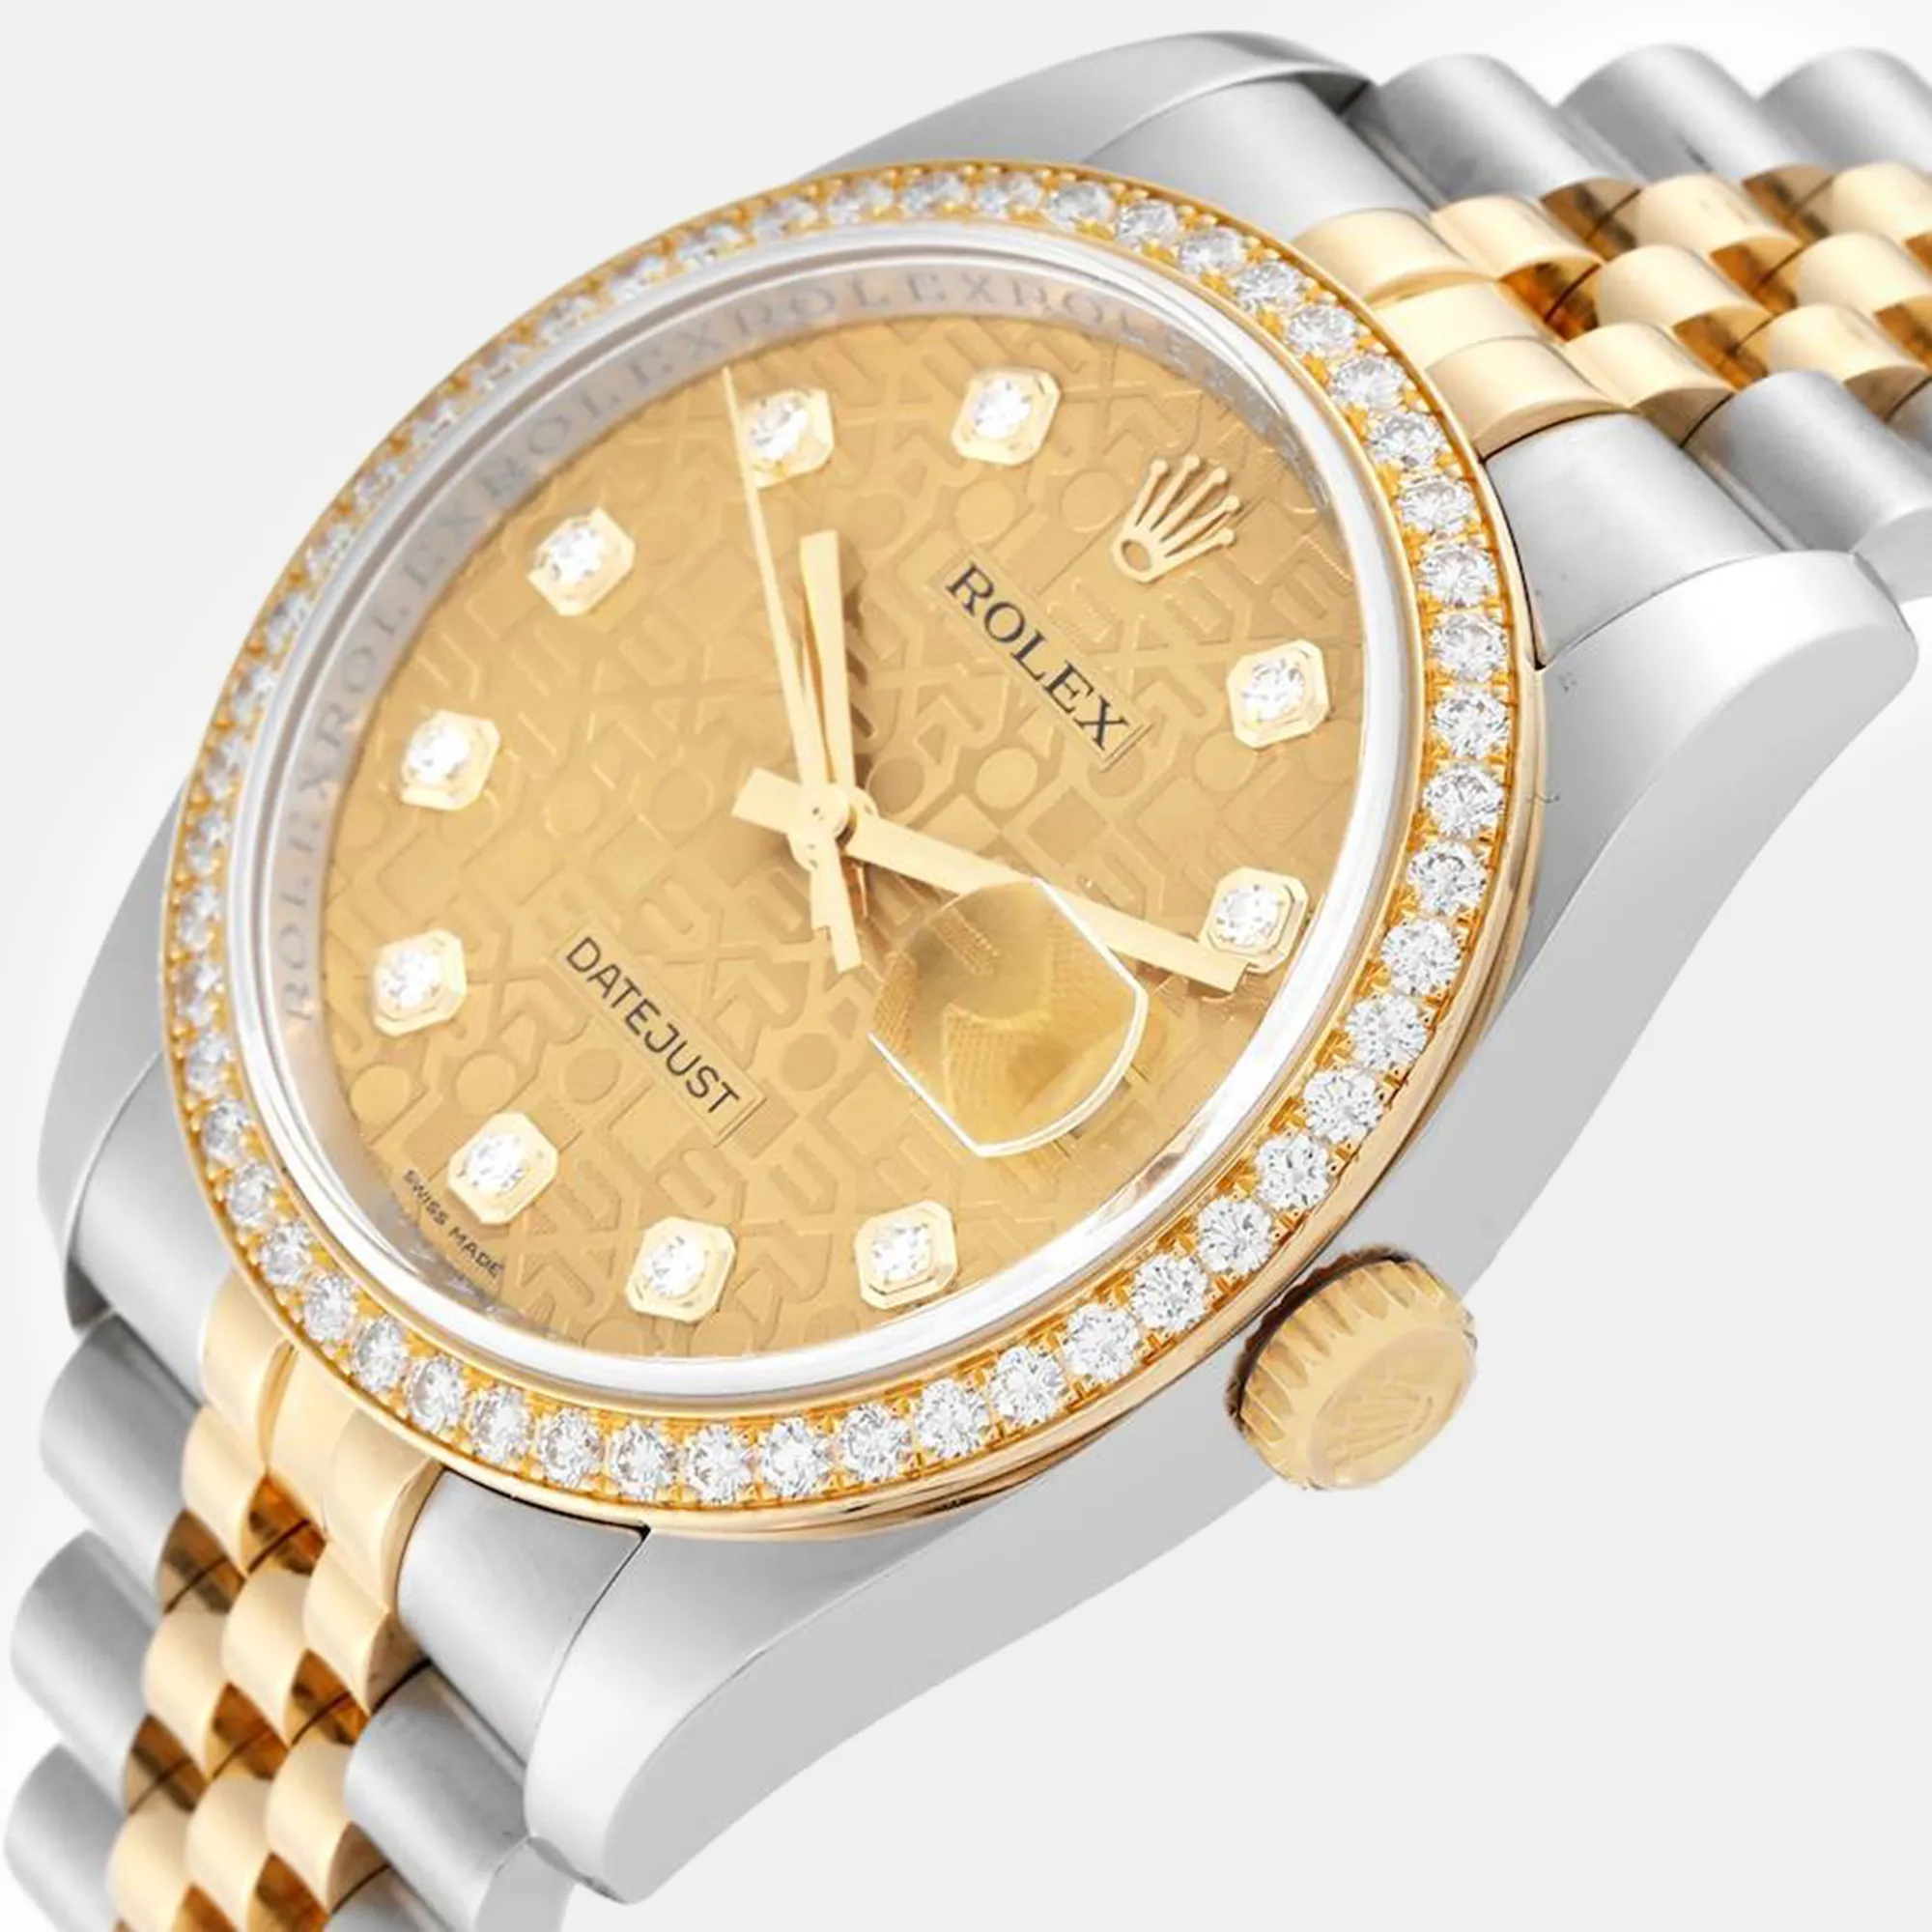 Rolex Datejust 36mm Yellow gold and stainless steel Champagne 7